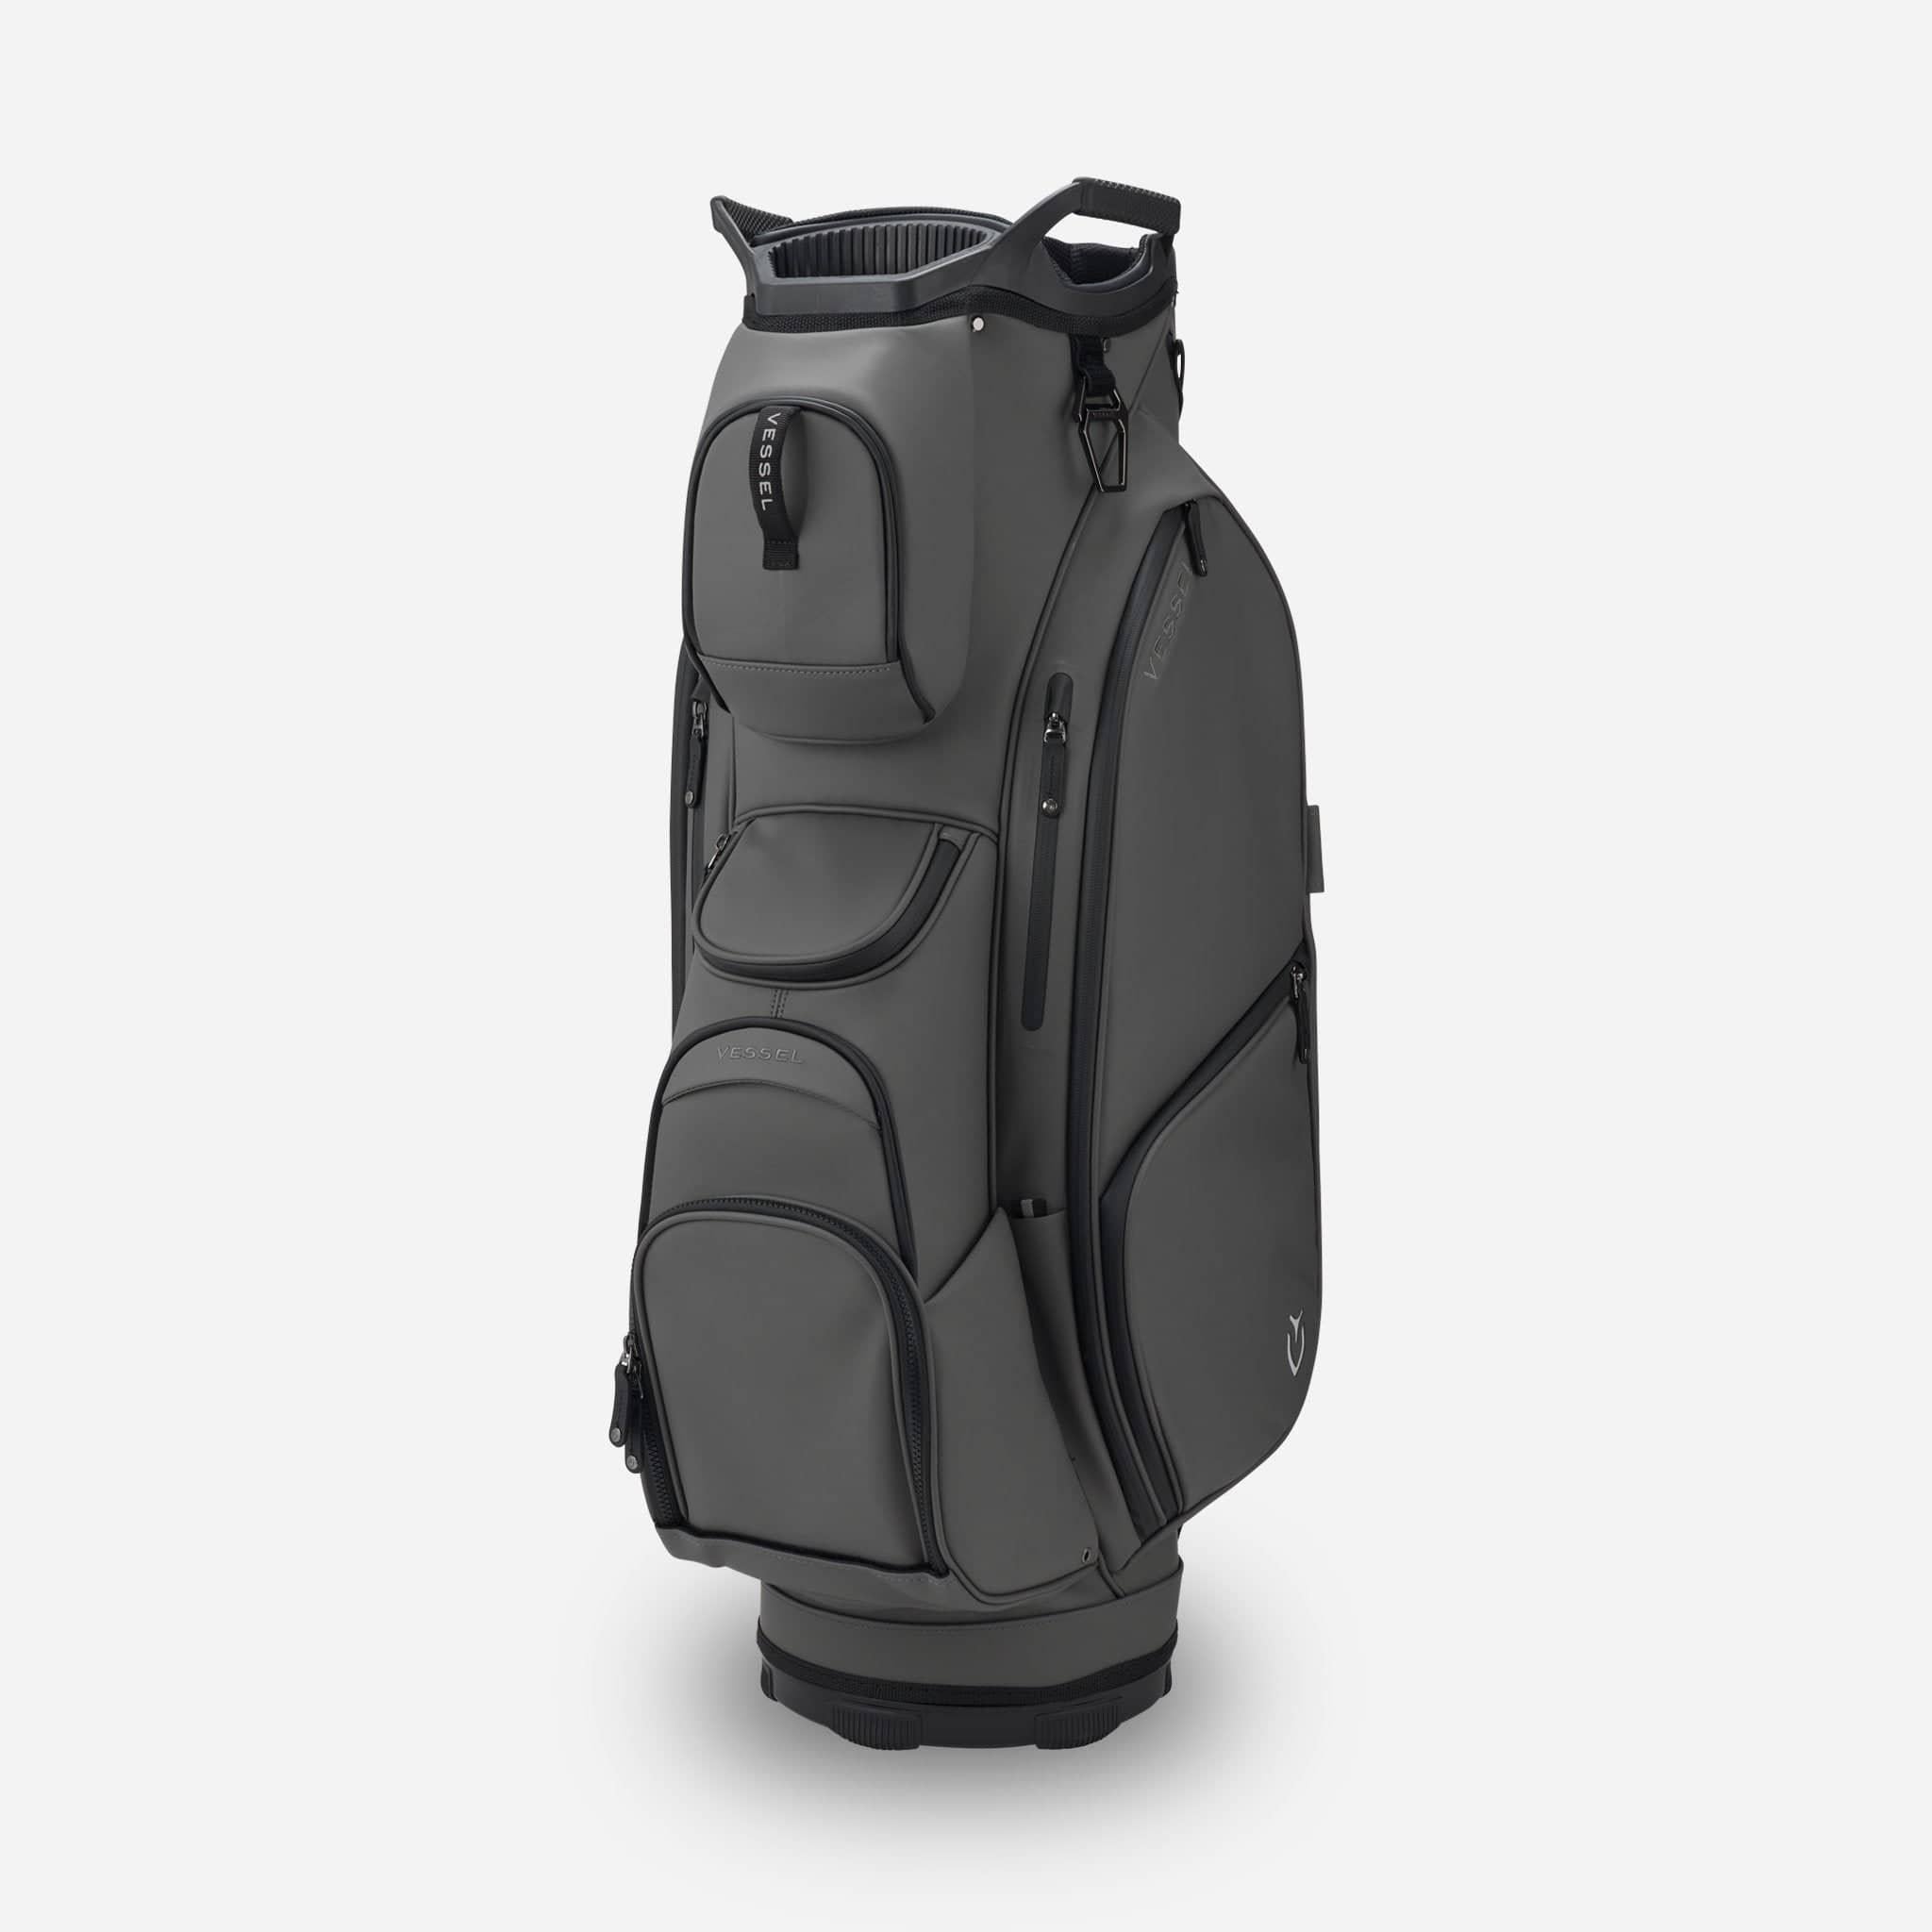 Vessel VLS Lux Perforated Black - Golf Bags/Carts/Headcovers - GolfWRX